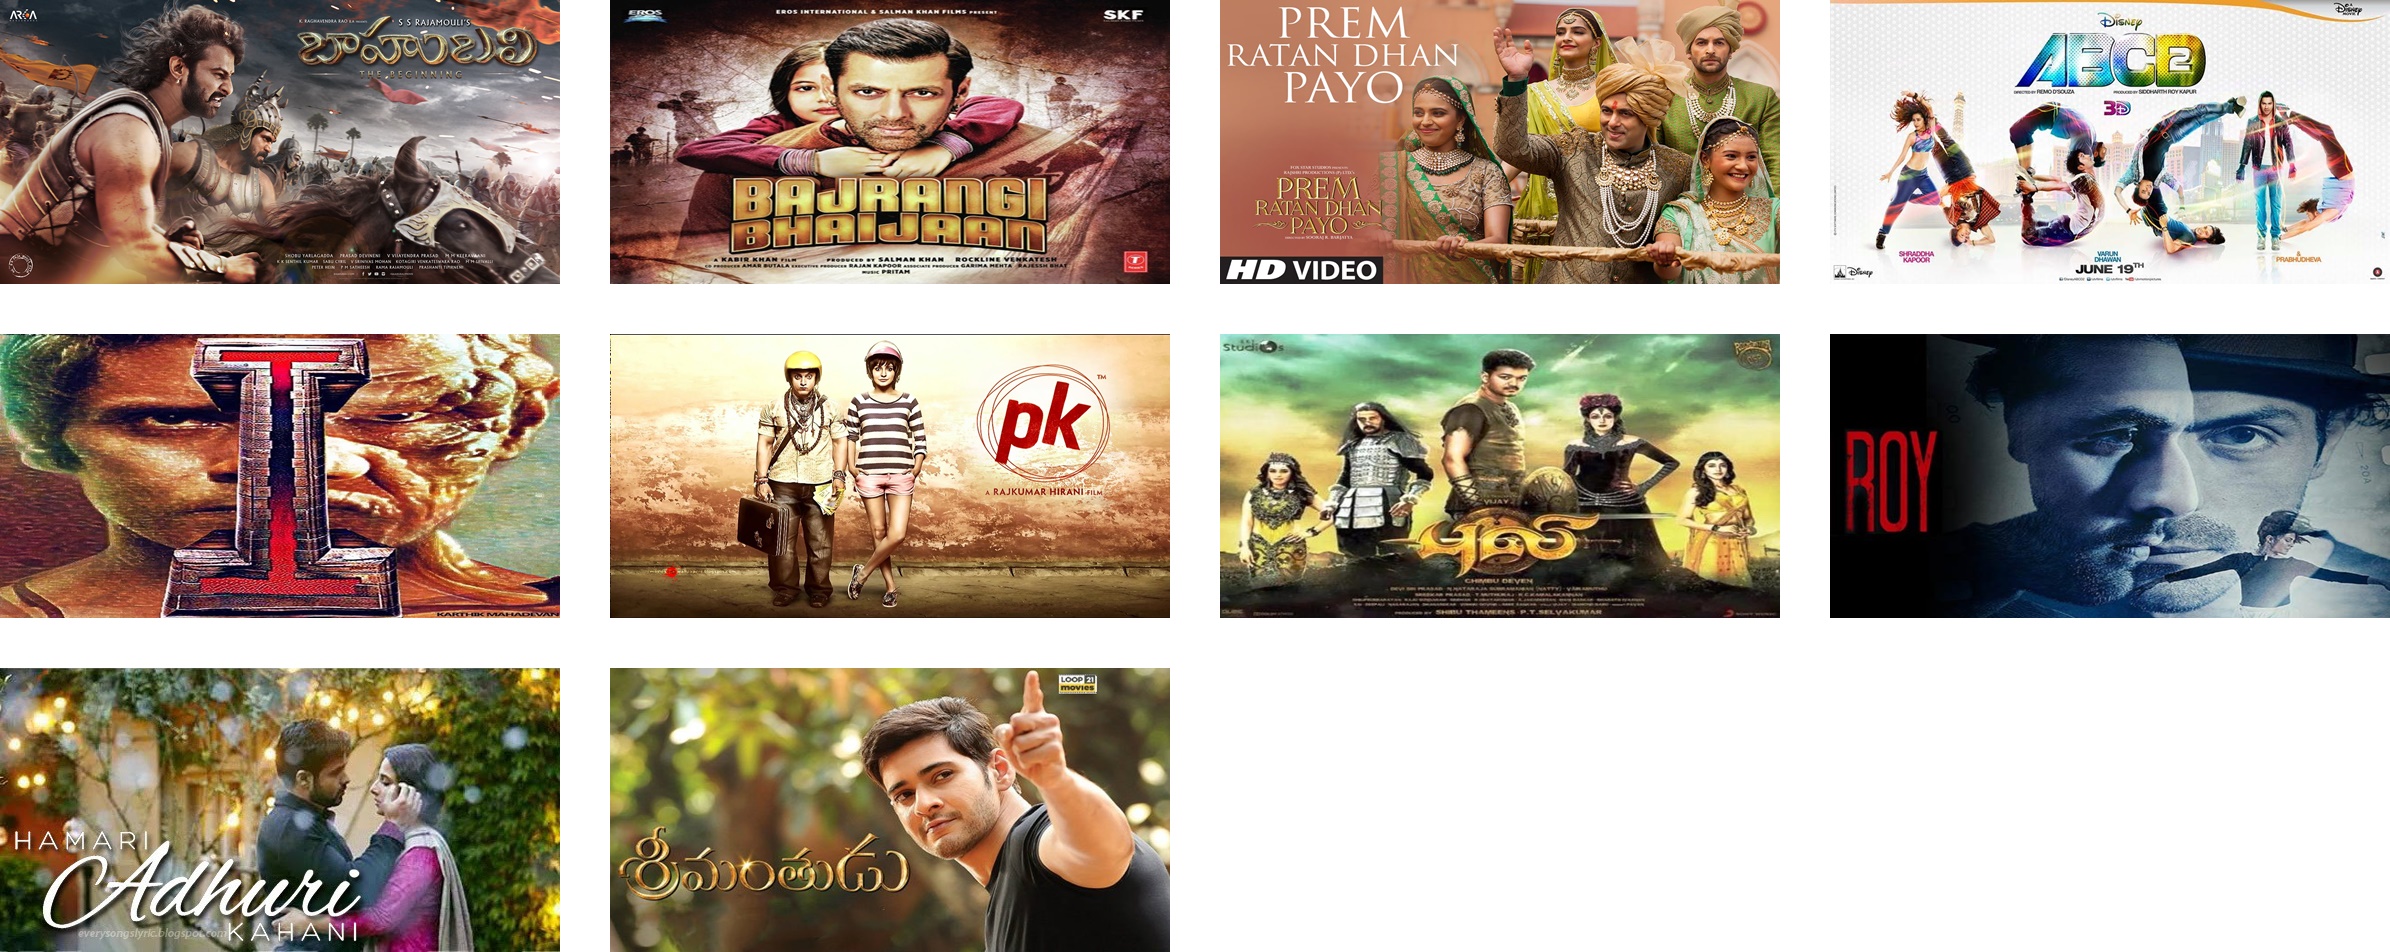 Top 10 searched movies of 2015 – Global and India